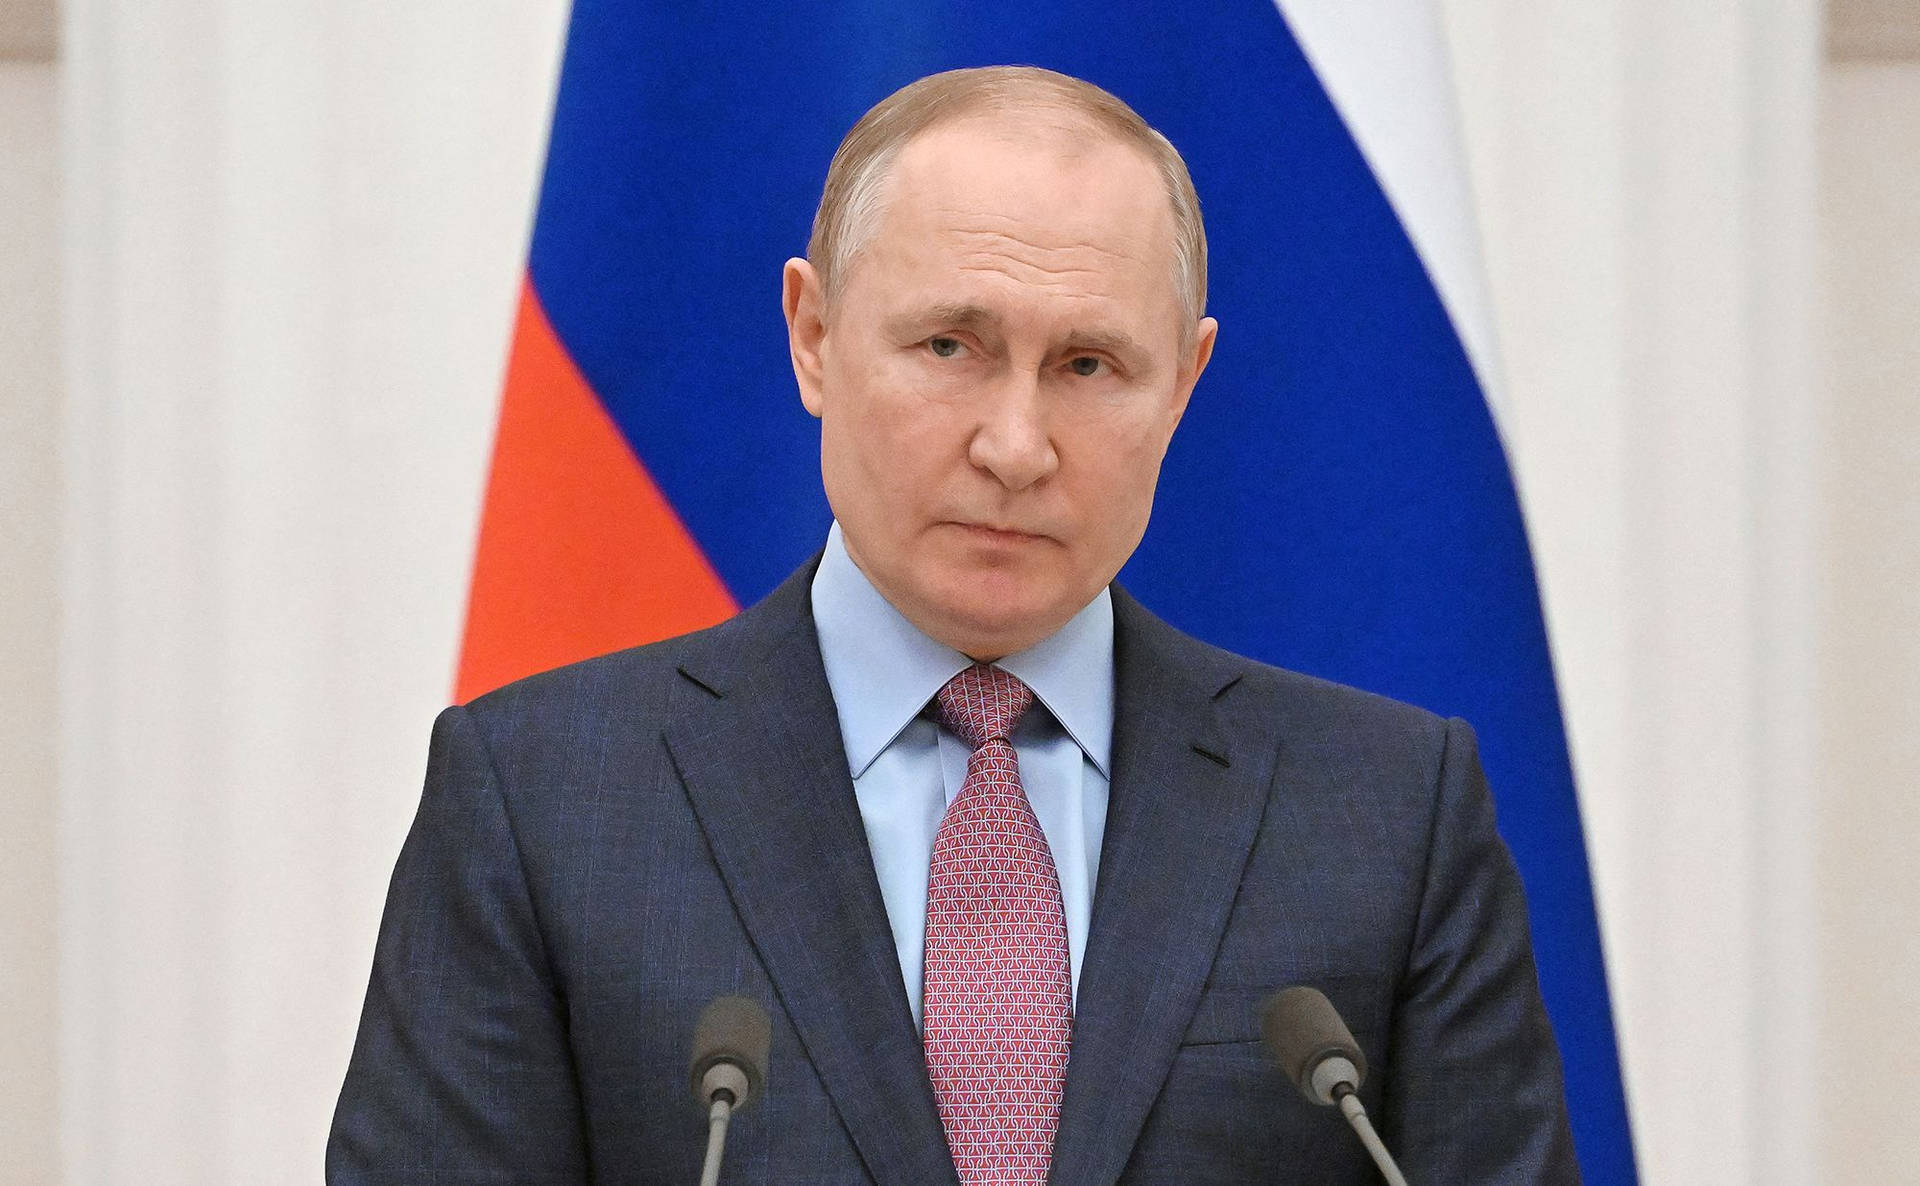 Vladimir Putin With Red And Blue Flag Wallpaper